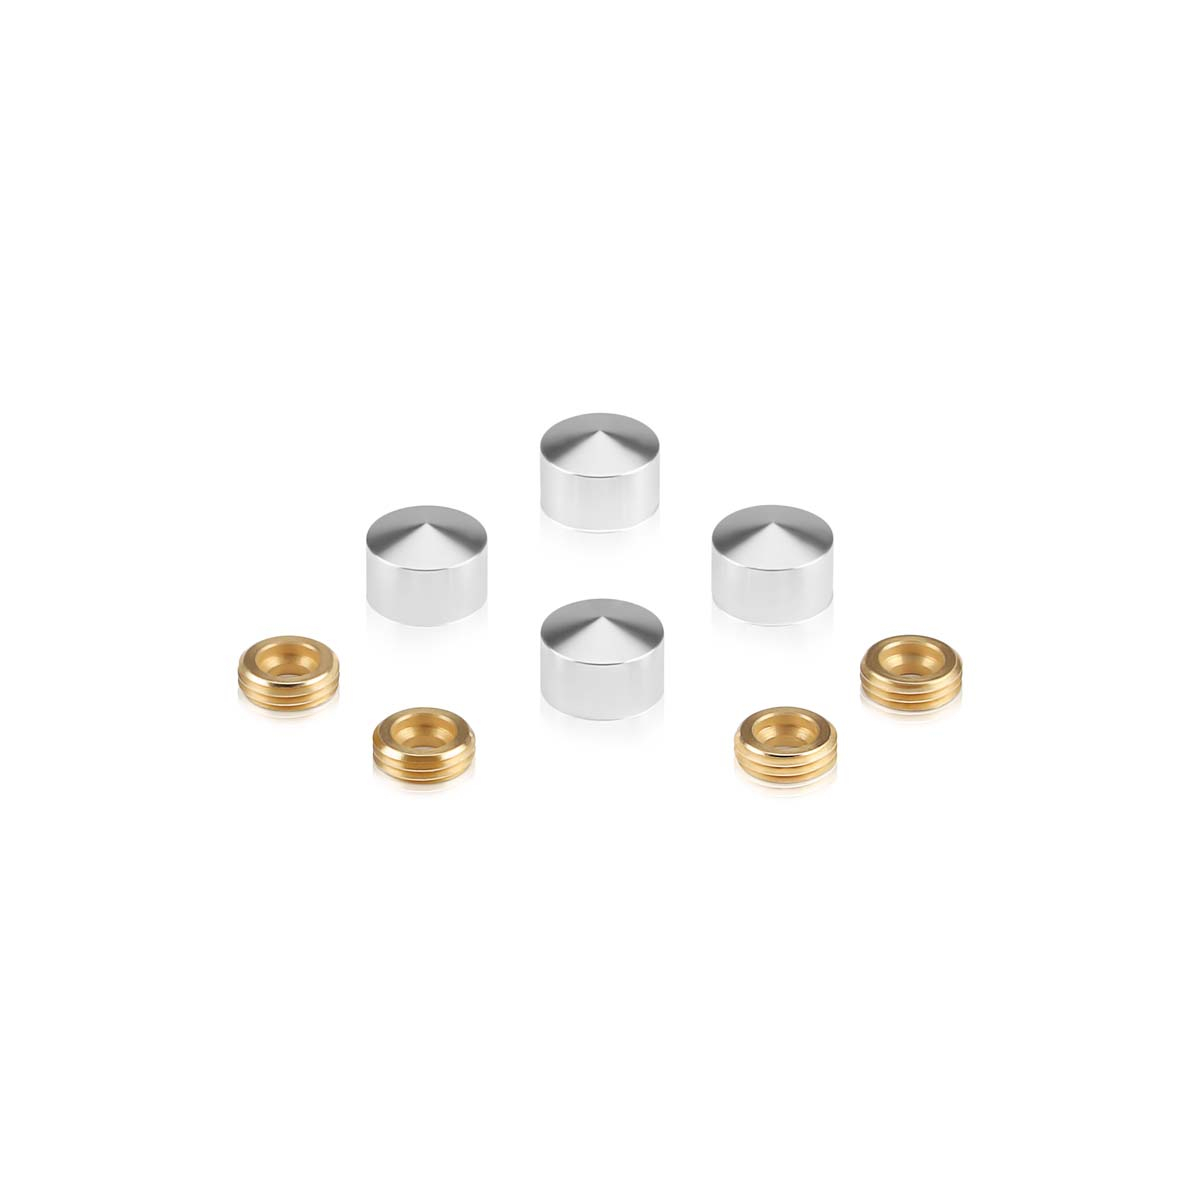 Set of 4 Conical Screw Cover, Diameter: 1/2'', Aluminum Shiny Anodized Finish (Indoor or Outdoor Use)